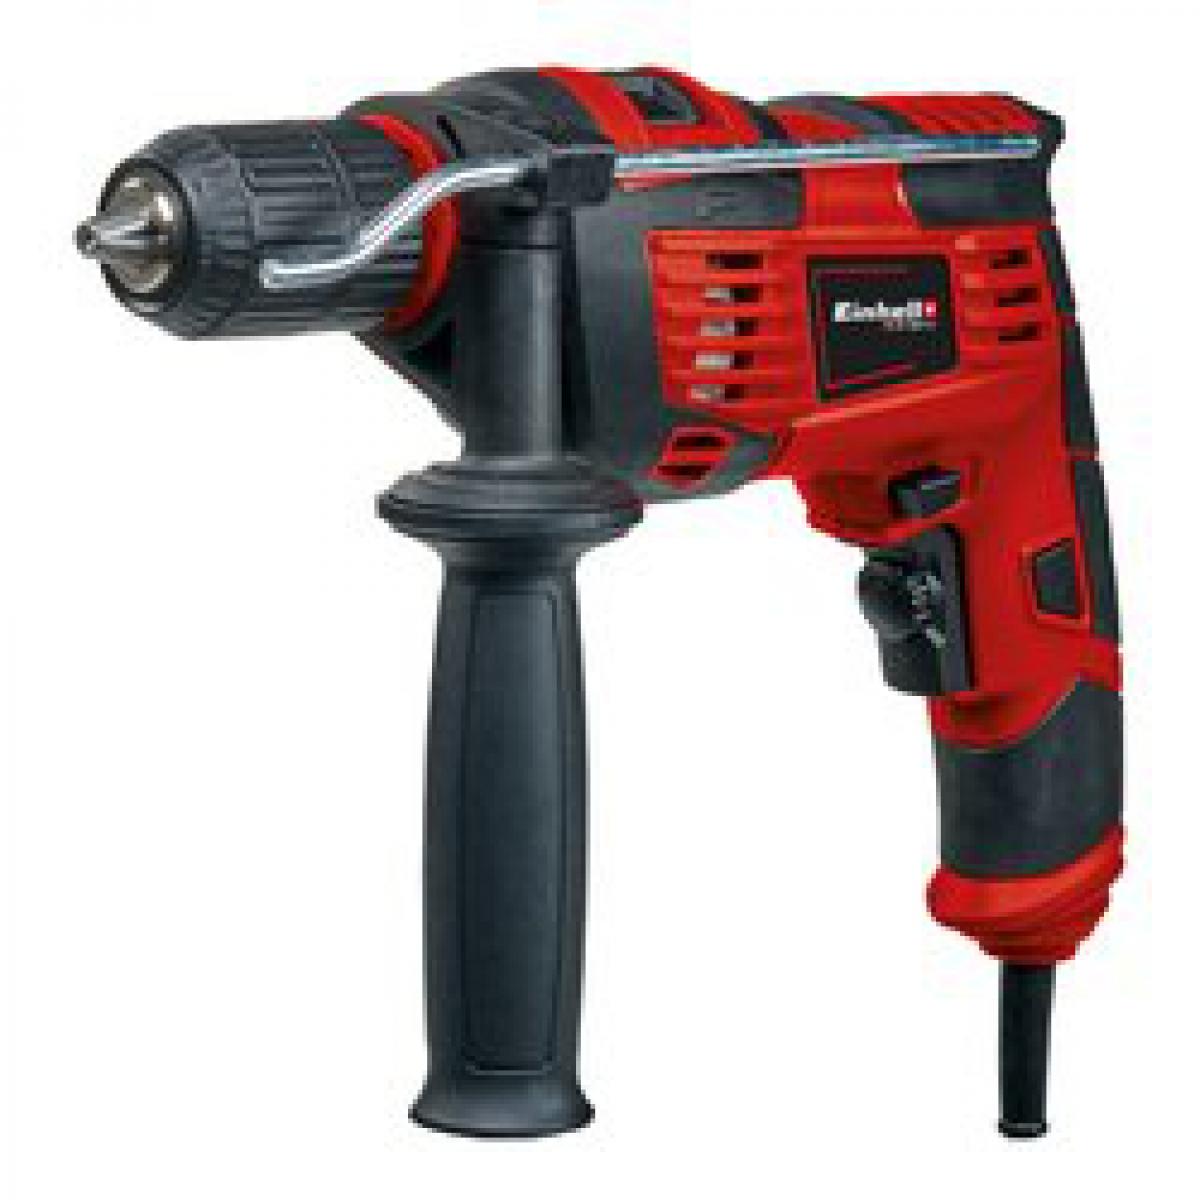 Einhell - Trapano percussione Einhell TC-ID 720/1 E - Perceuses, visseuses filaires